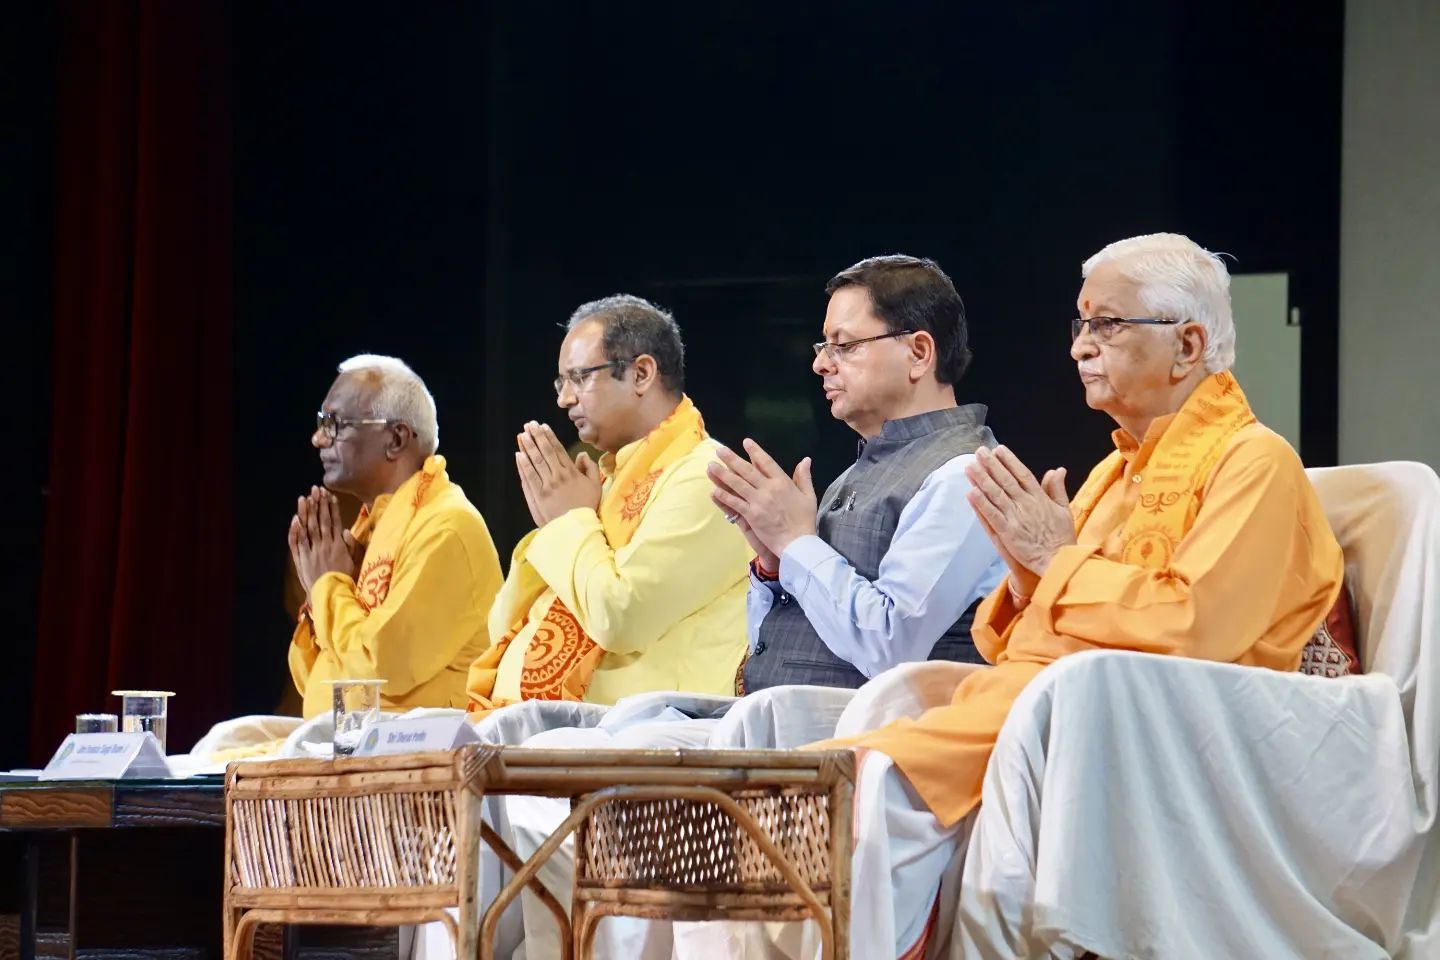 In the 40th Gyan Diksha ceremony of the university, the newly entered students took their first step towards service to society and the nation and tied them in the Vedic sutras.